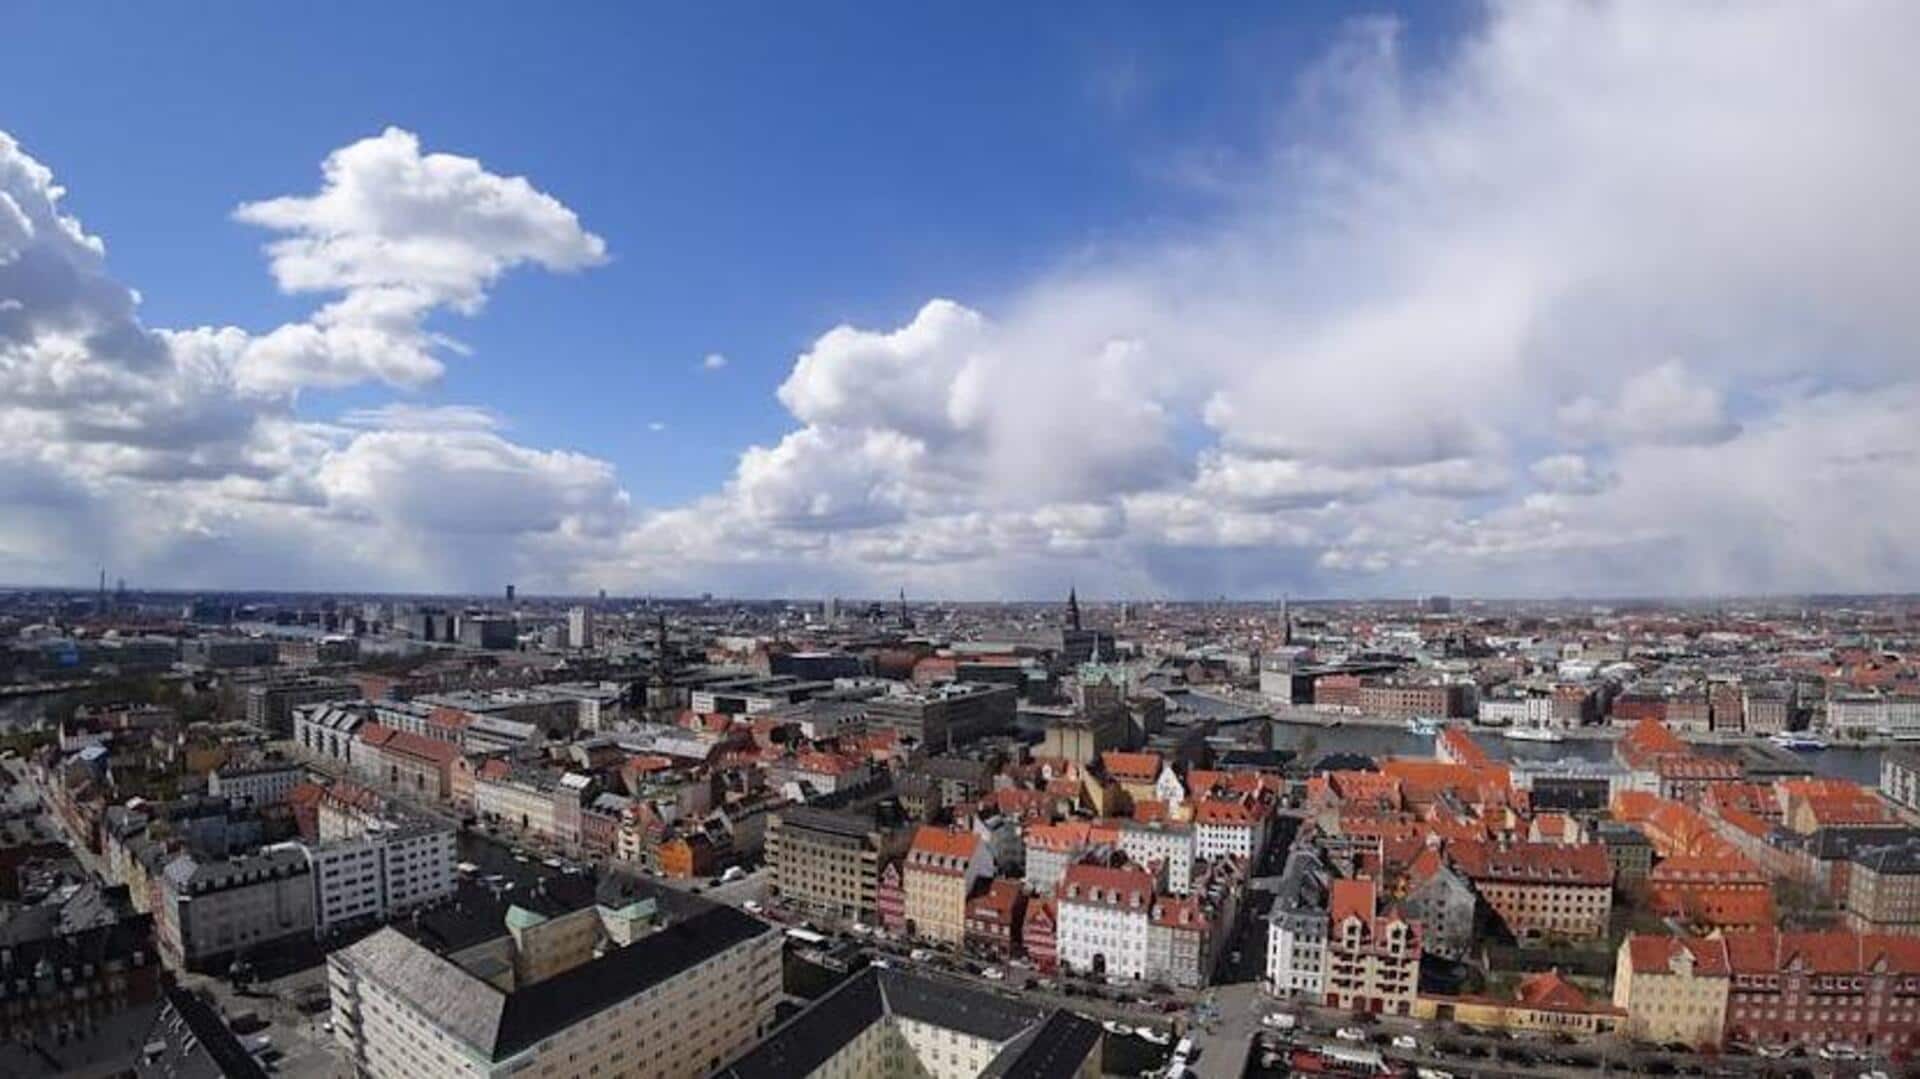 Explore Copenhagen's sustainable side with these recommendations